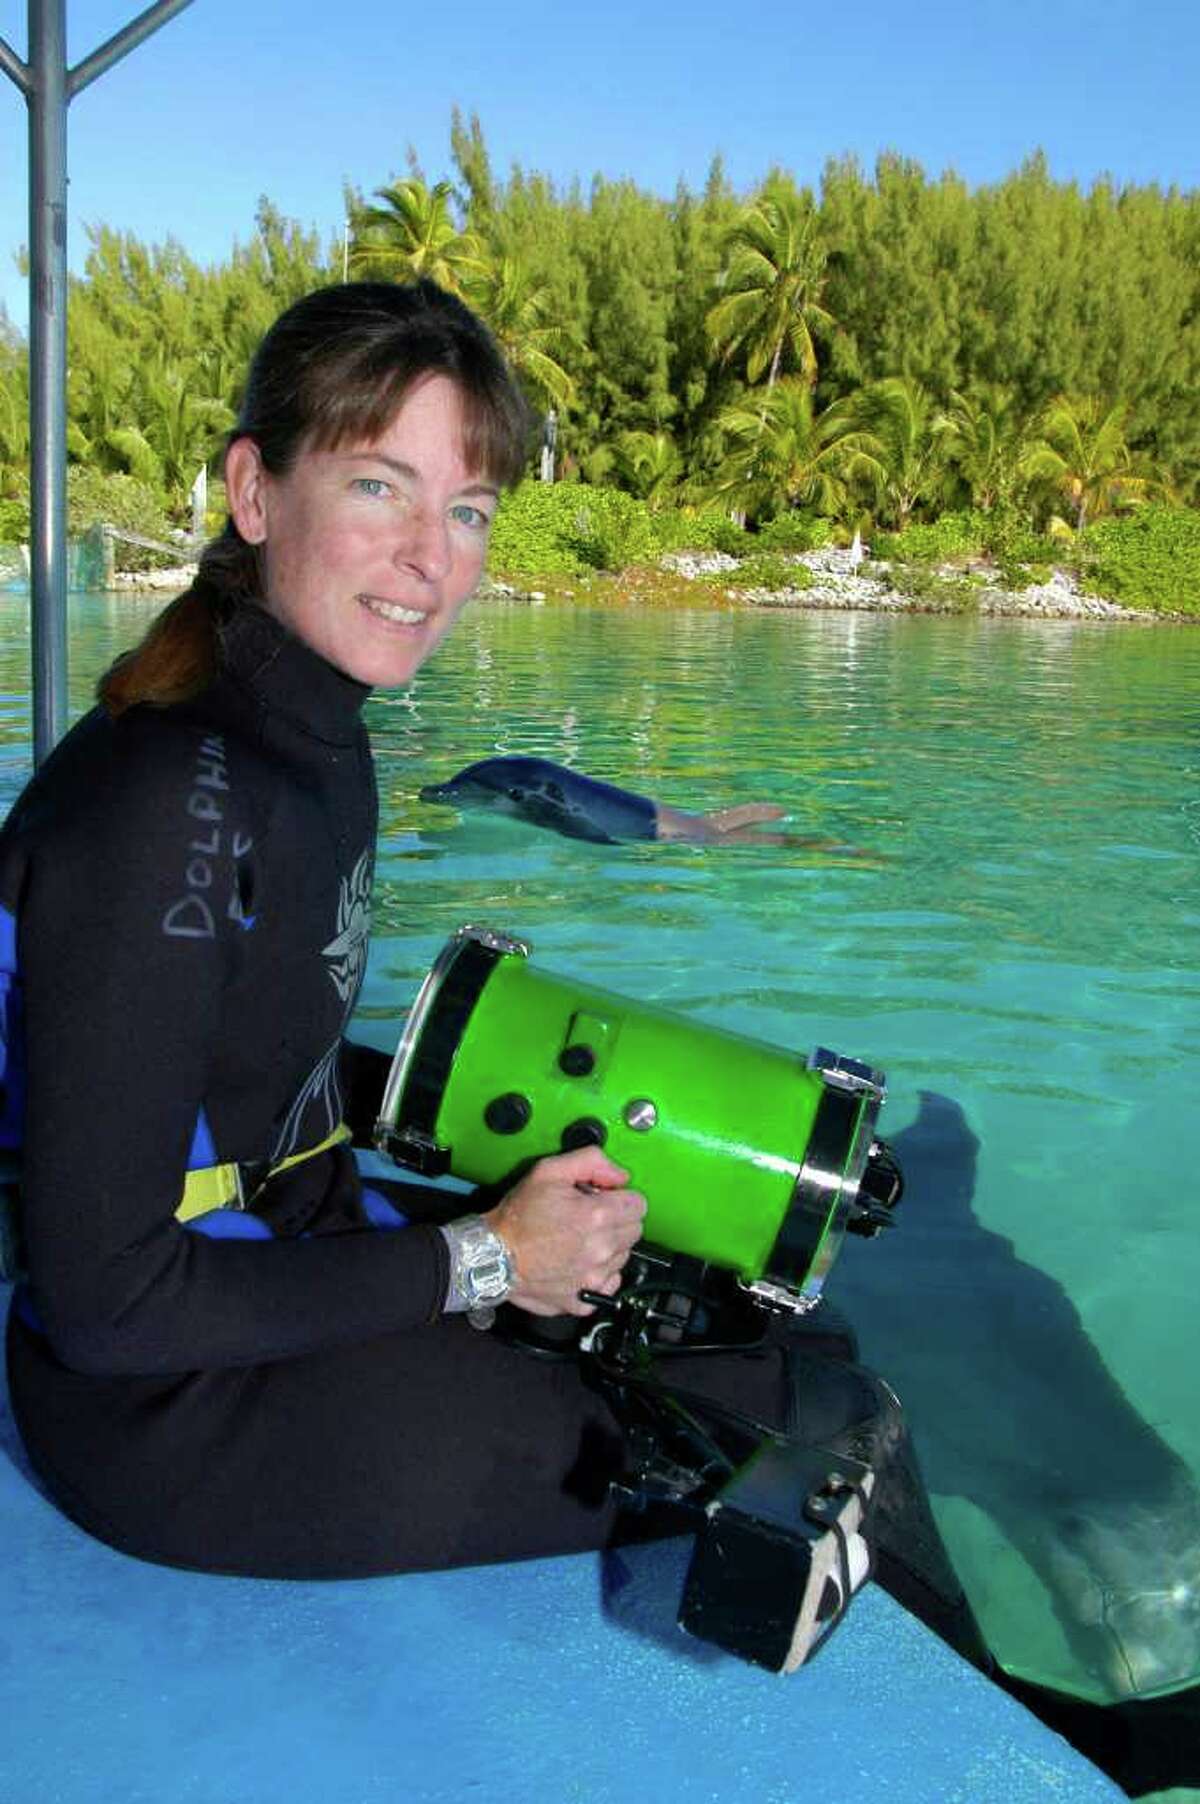 Marine biologist Kathleen Dudzinski, a native of Meriden, will discuss her research and the making of the film, "Dolphin," during a special lecture on Thursday, June 9 at the Maritime Aquarium at Norwalk.